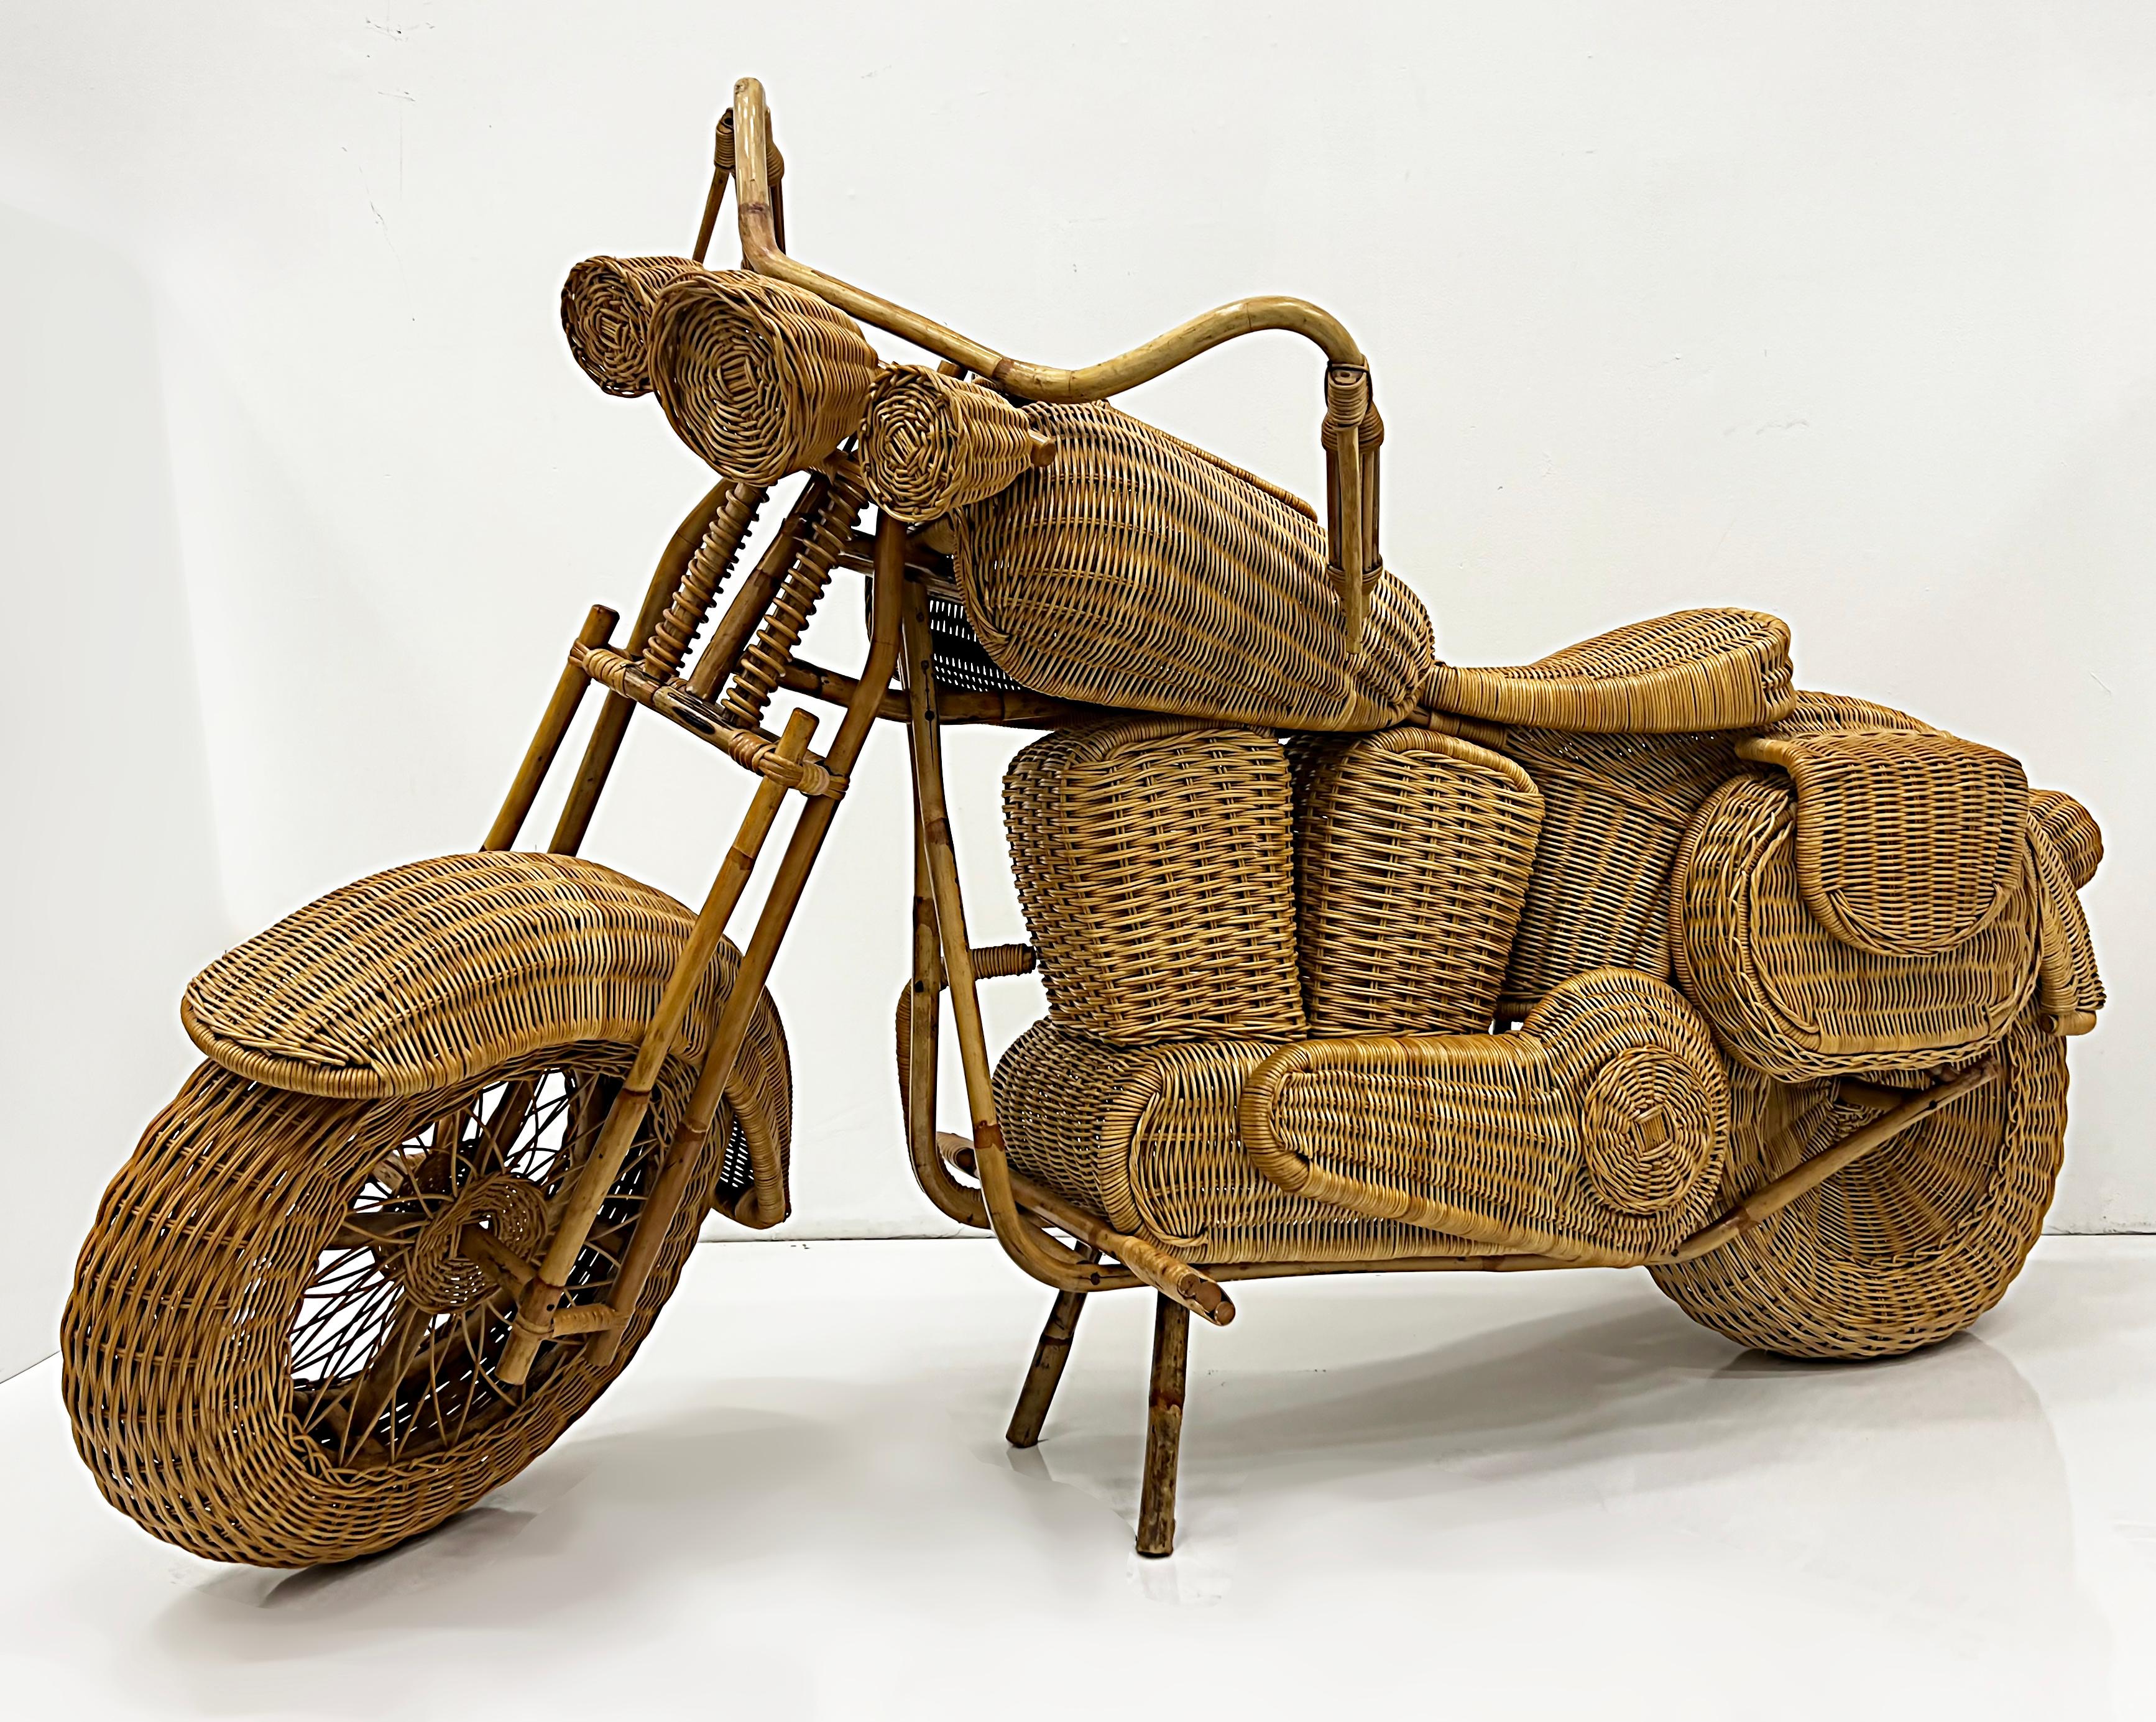 
Vintage Life-size Harley Davidson Wicker Motorcycle

Offered for sale is a life-size iconic hand-woven wicker Harley Davidson motorcycle attributed to Tom Dixon Designs from the 1980s. This is a fabulous vintage sculptural piece created with a